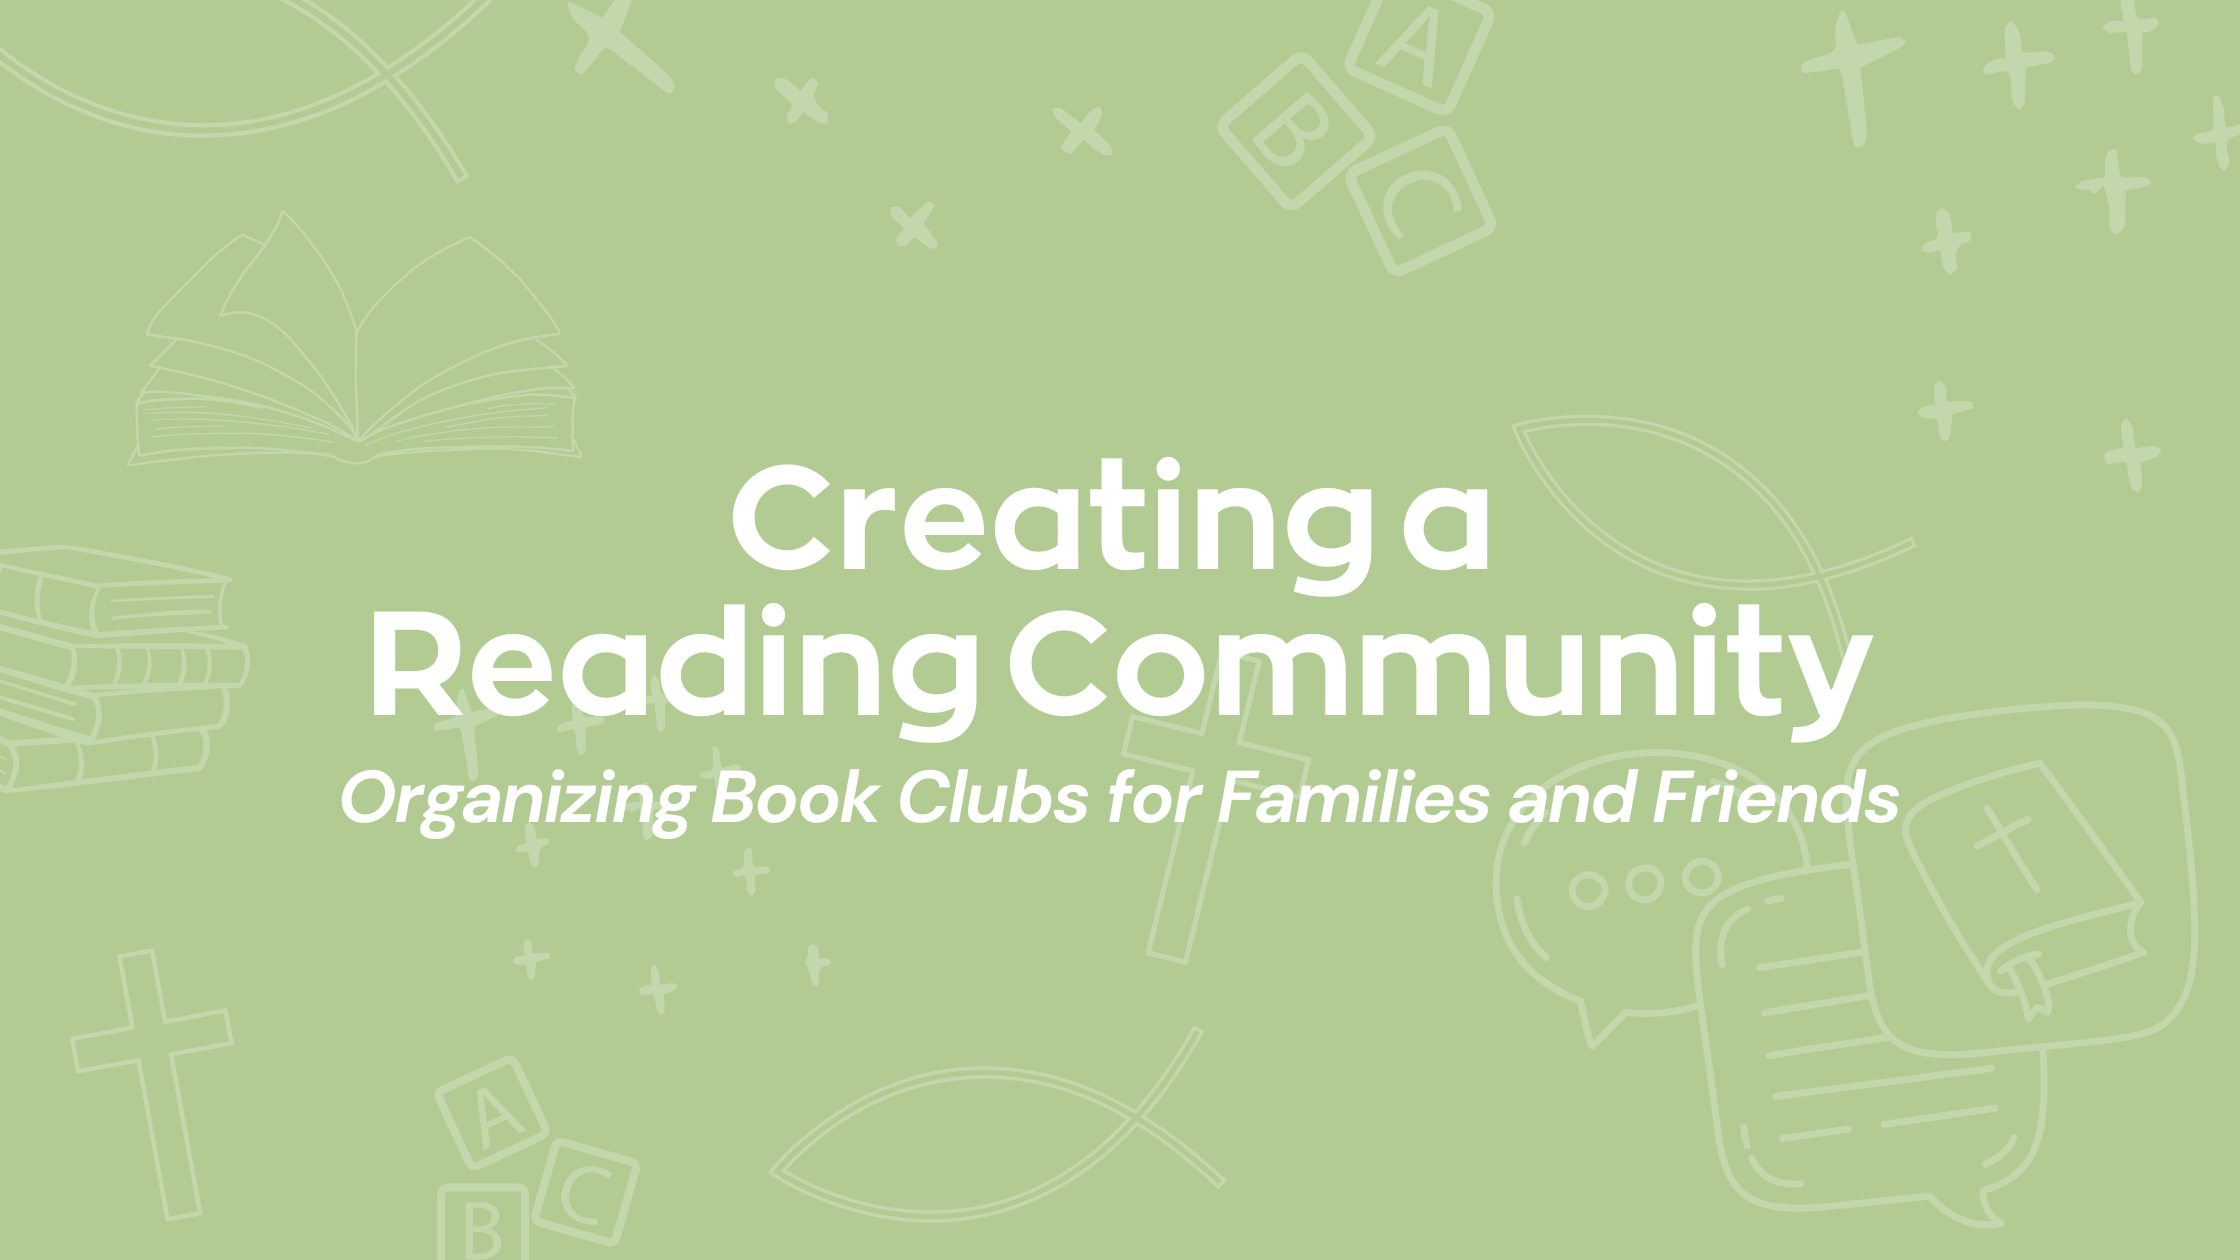 Creating a Reading Community: Organizing Book Clubs for Families and Friends